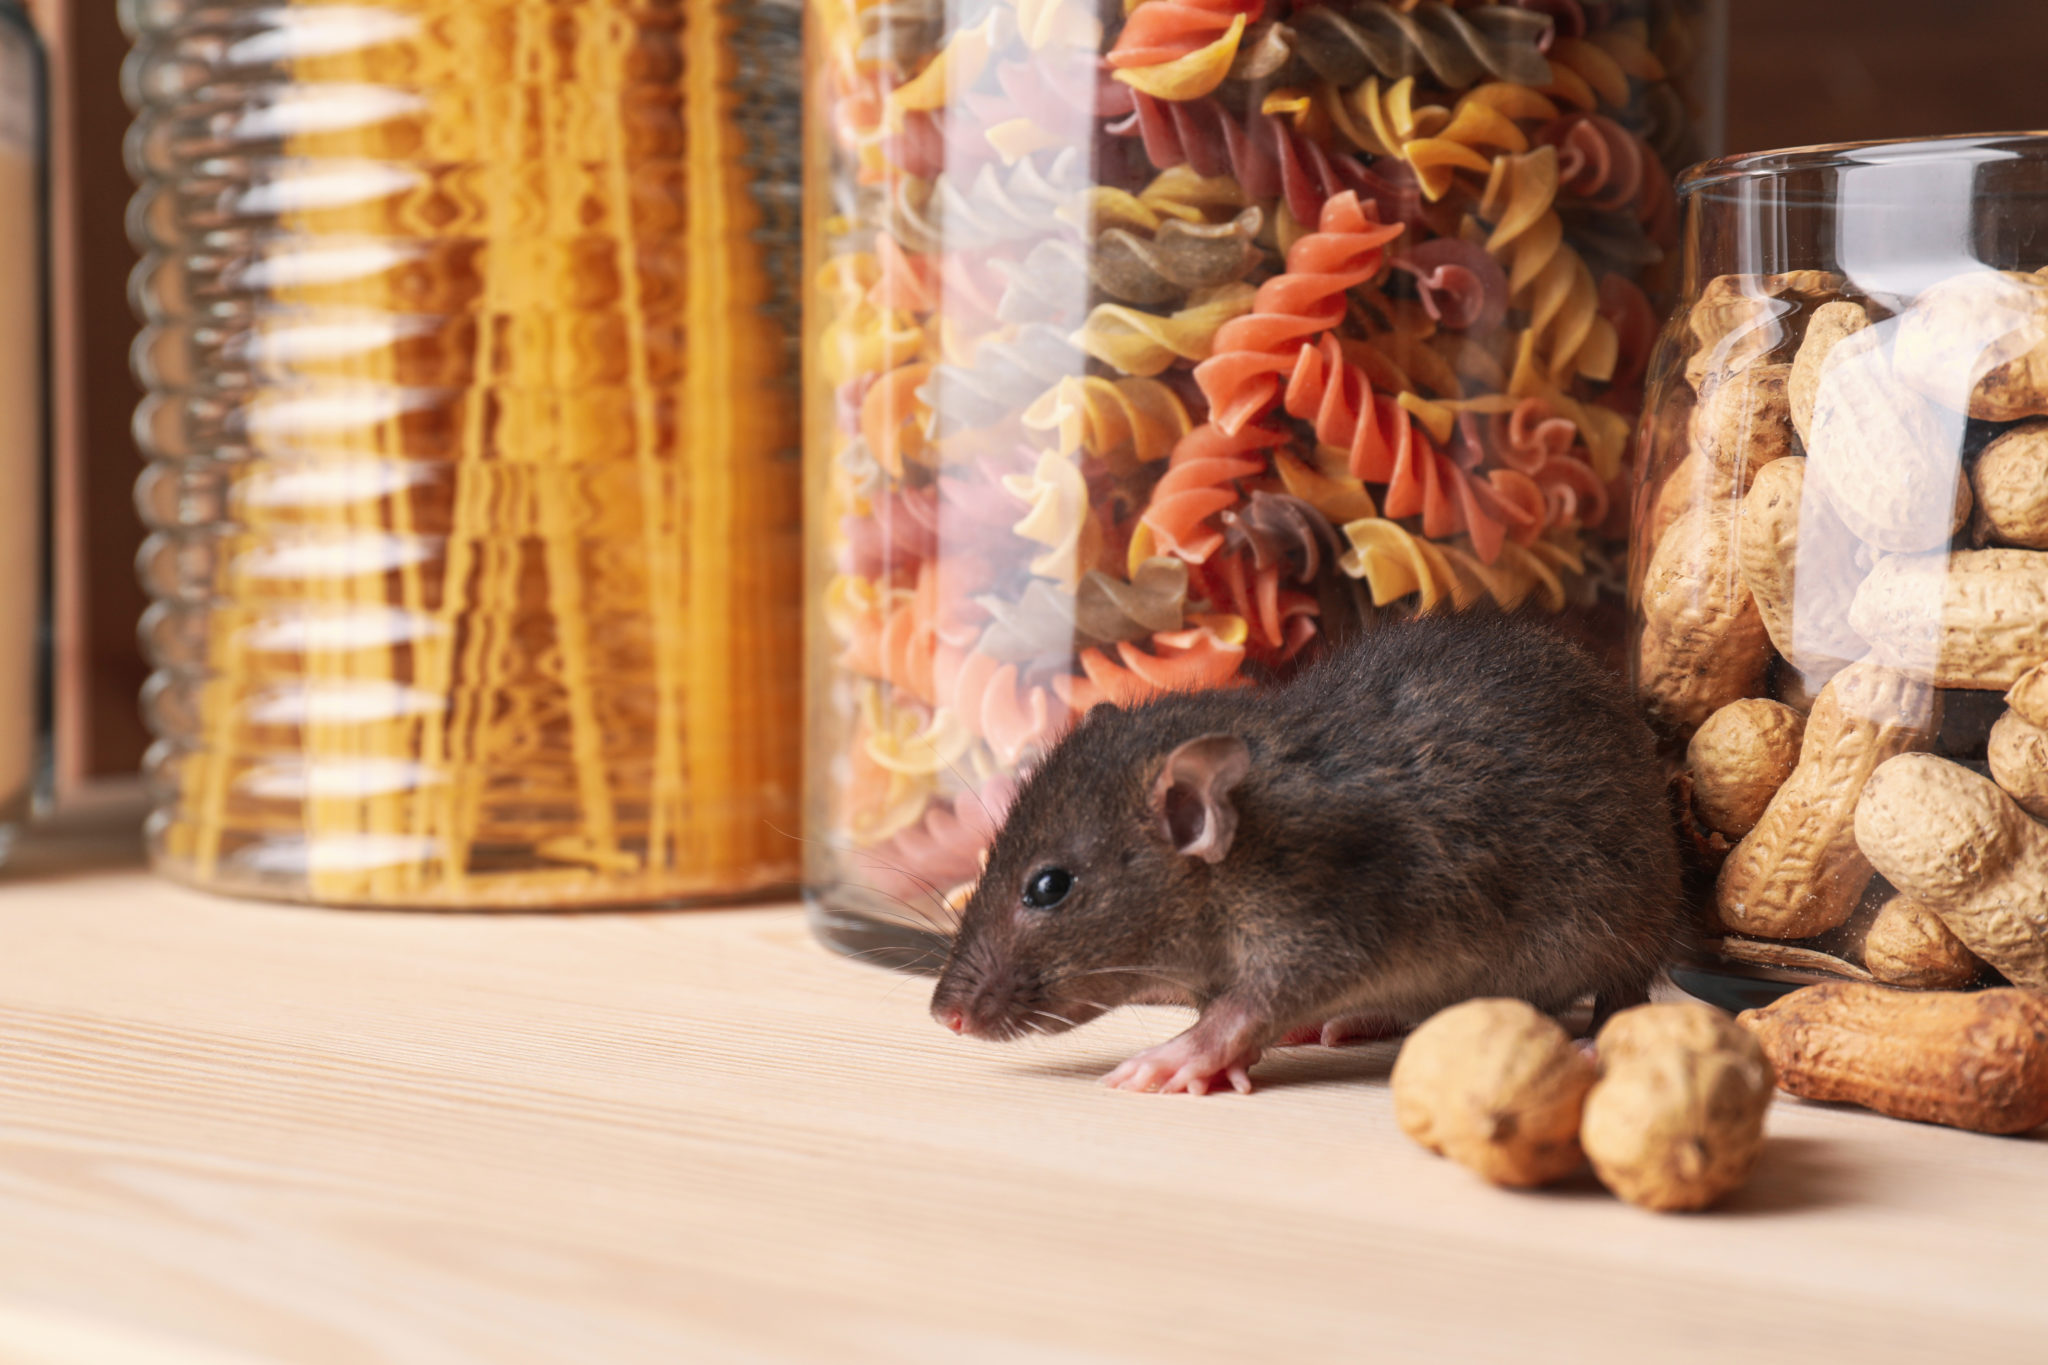 Mice Multiply in Spring! Get Ahead of Rodents with SMART - Flick